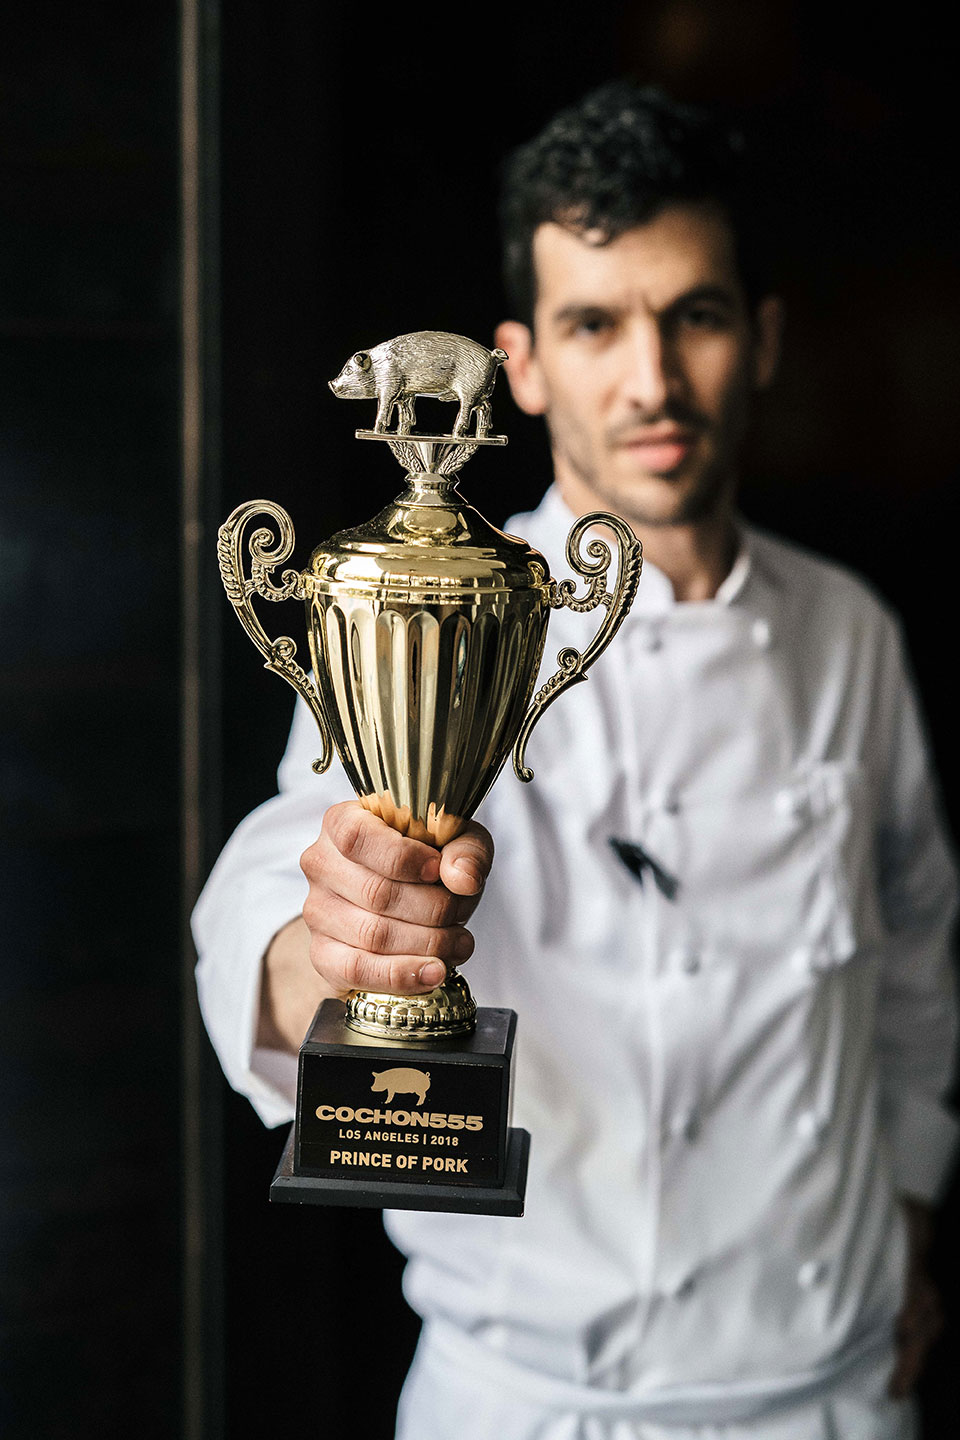 chef holding trophy